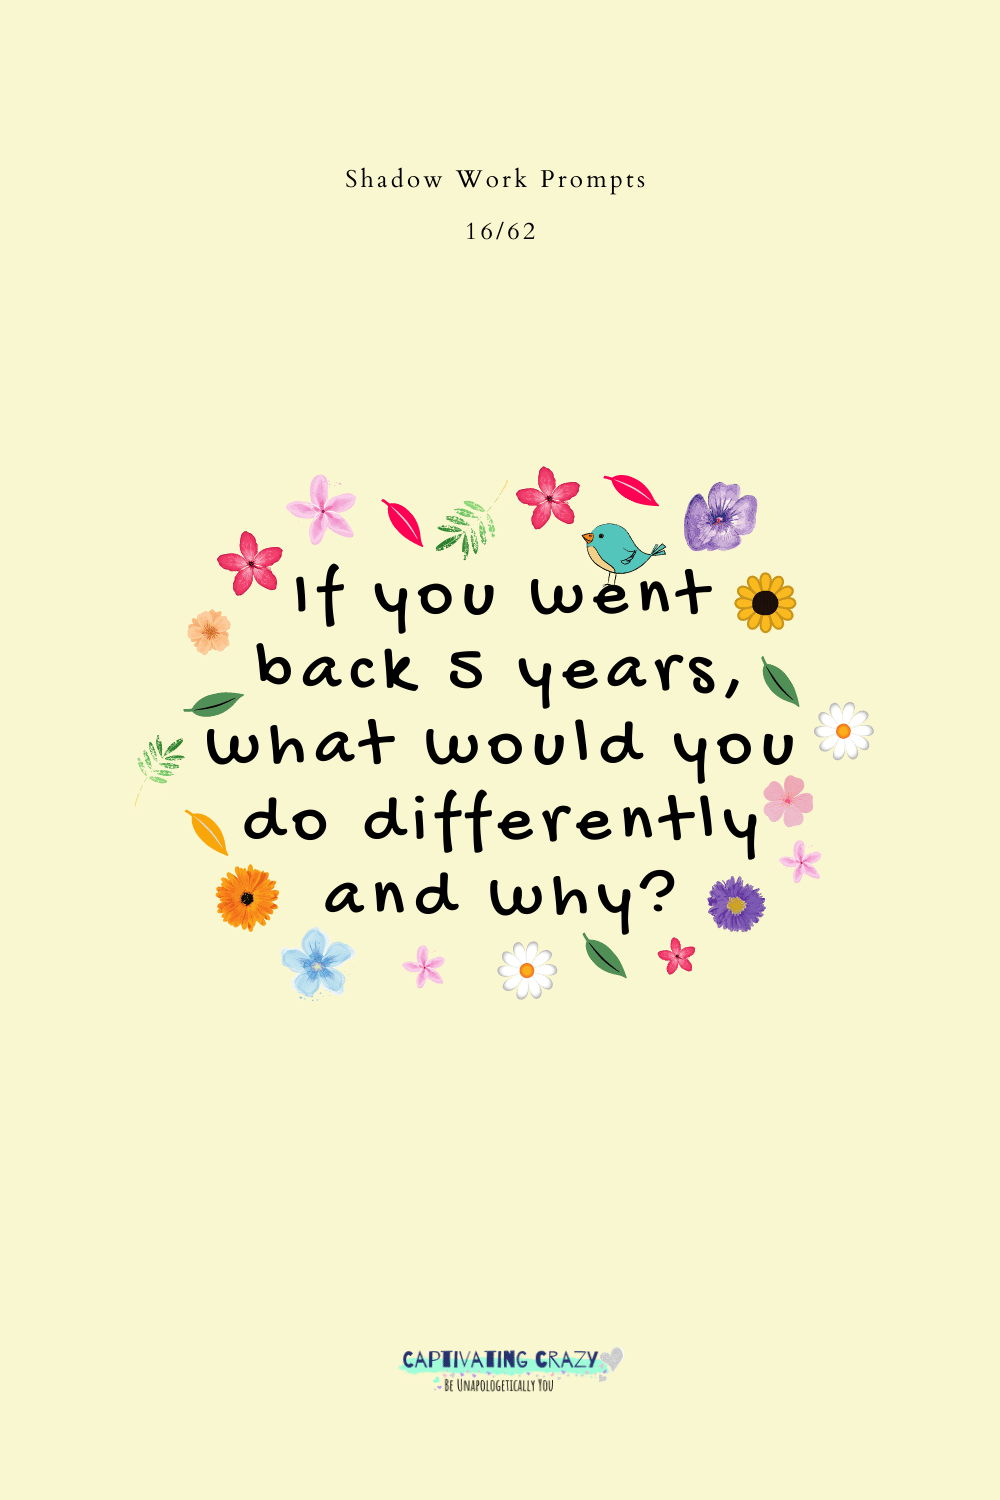 If you went back 5 years, what would you do differently and why?